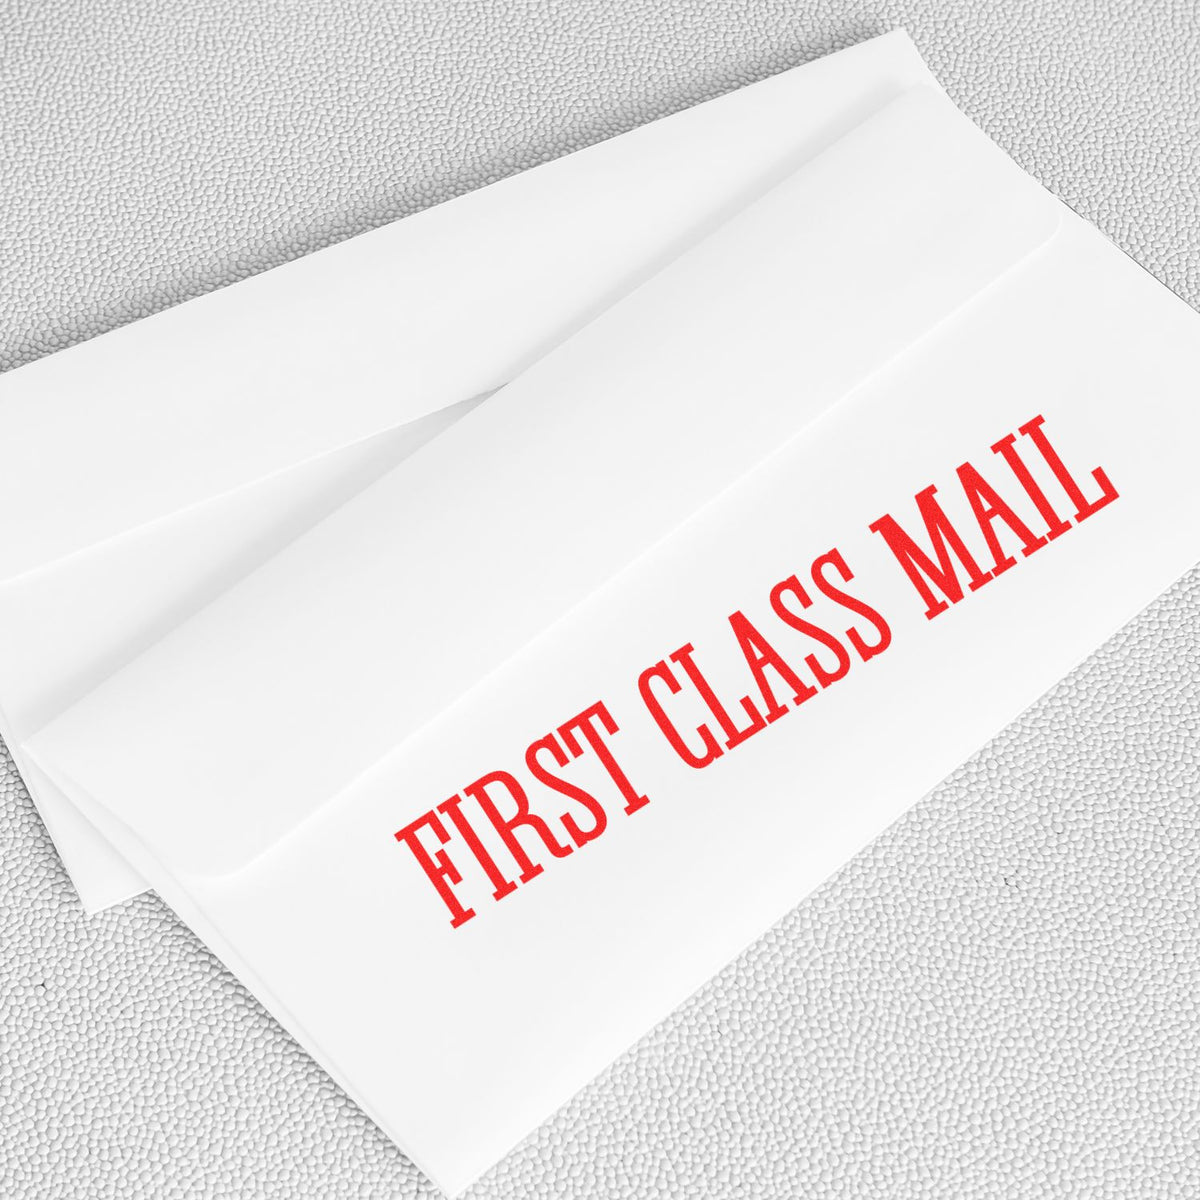 Times First Class Mail Rubber Stamp In Use Photo